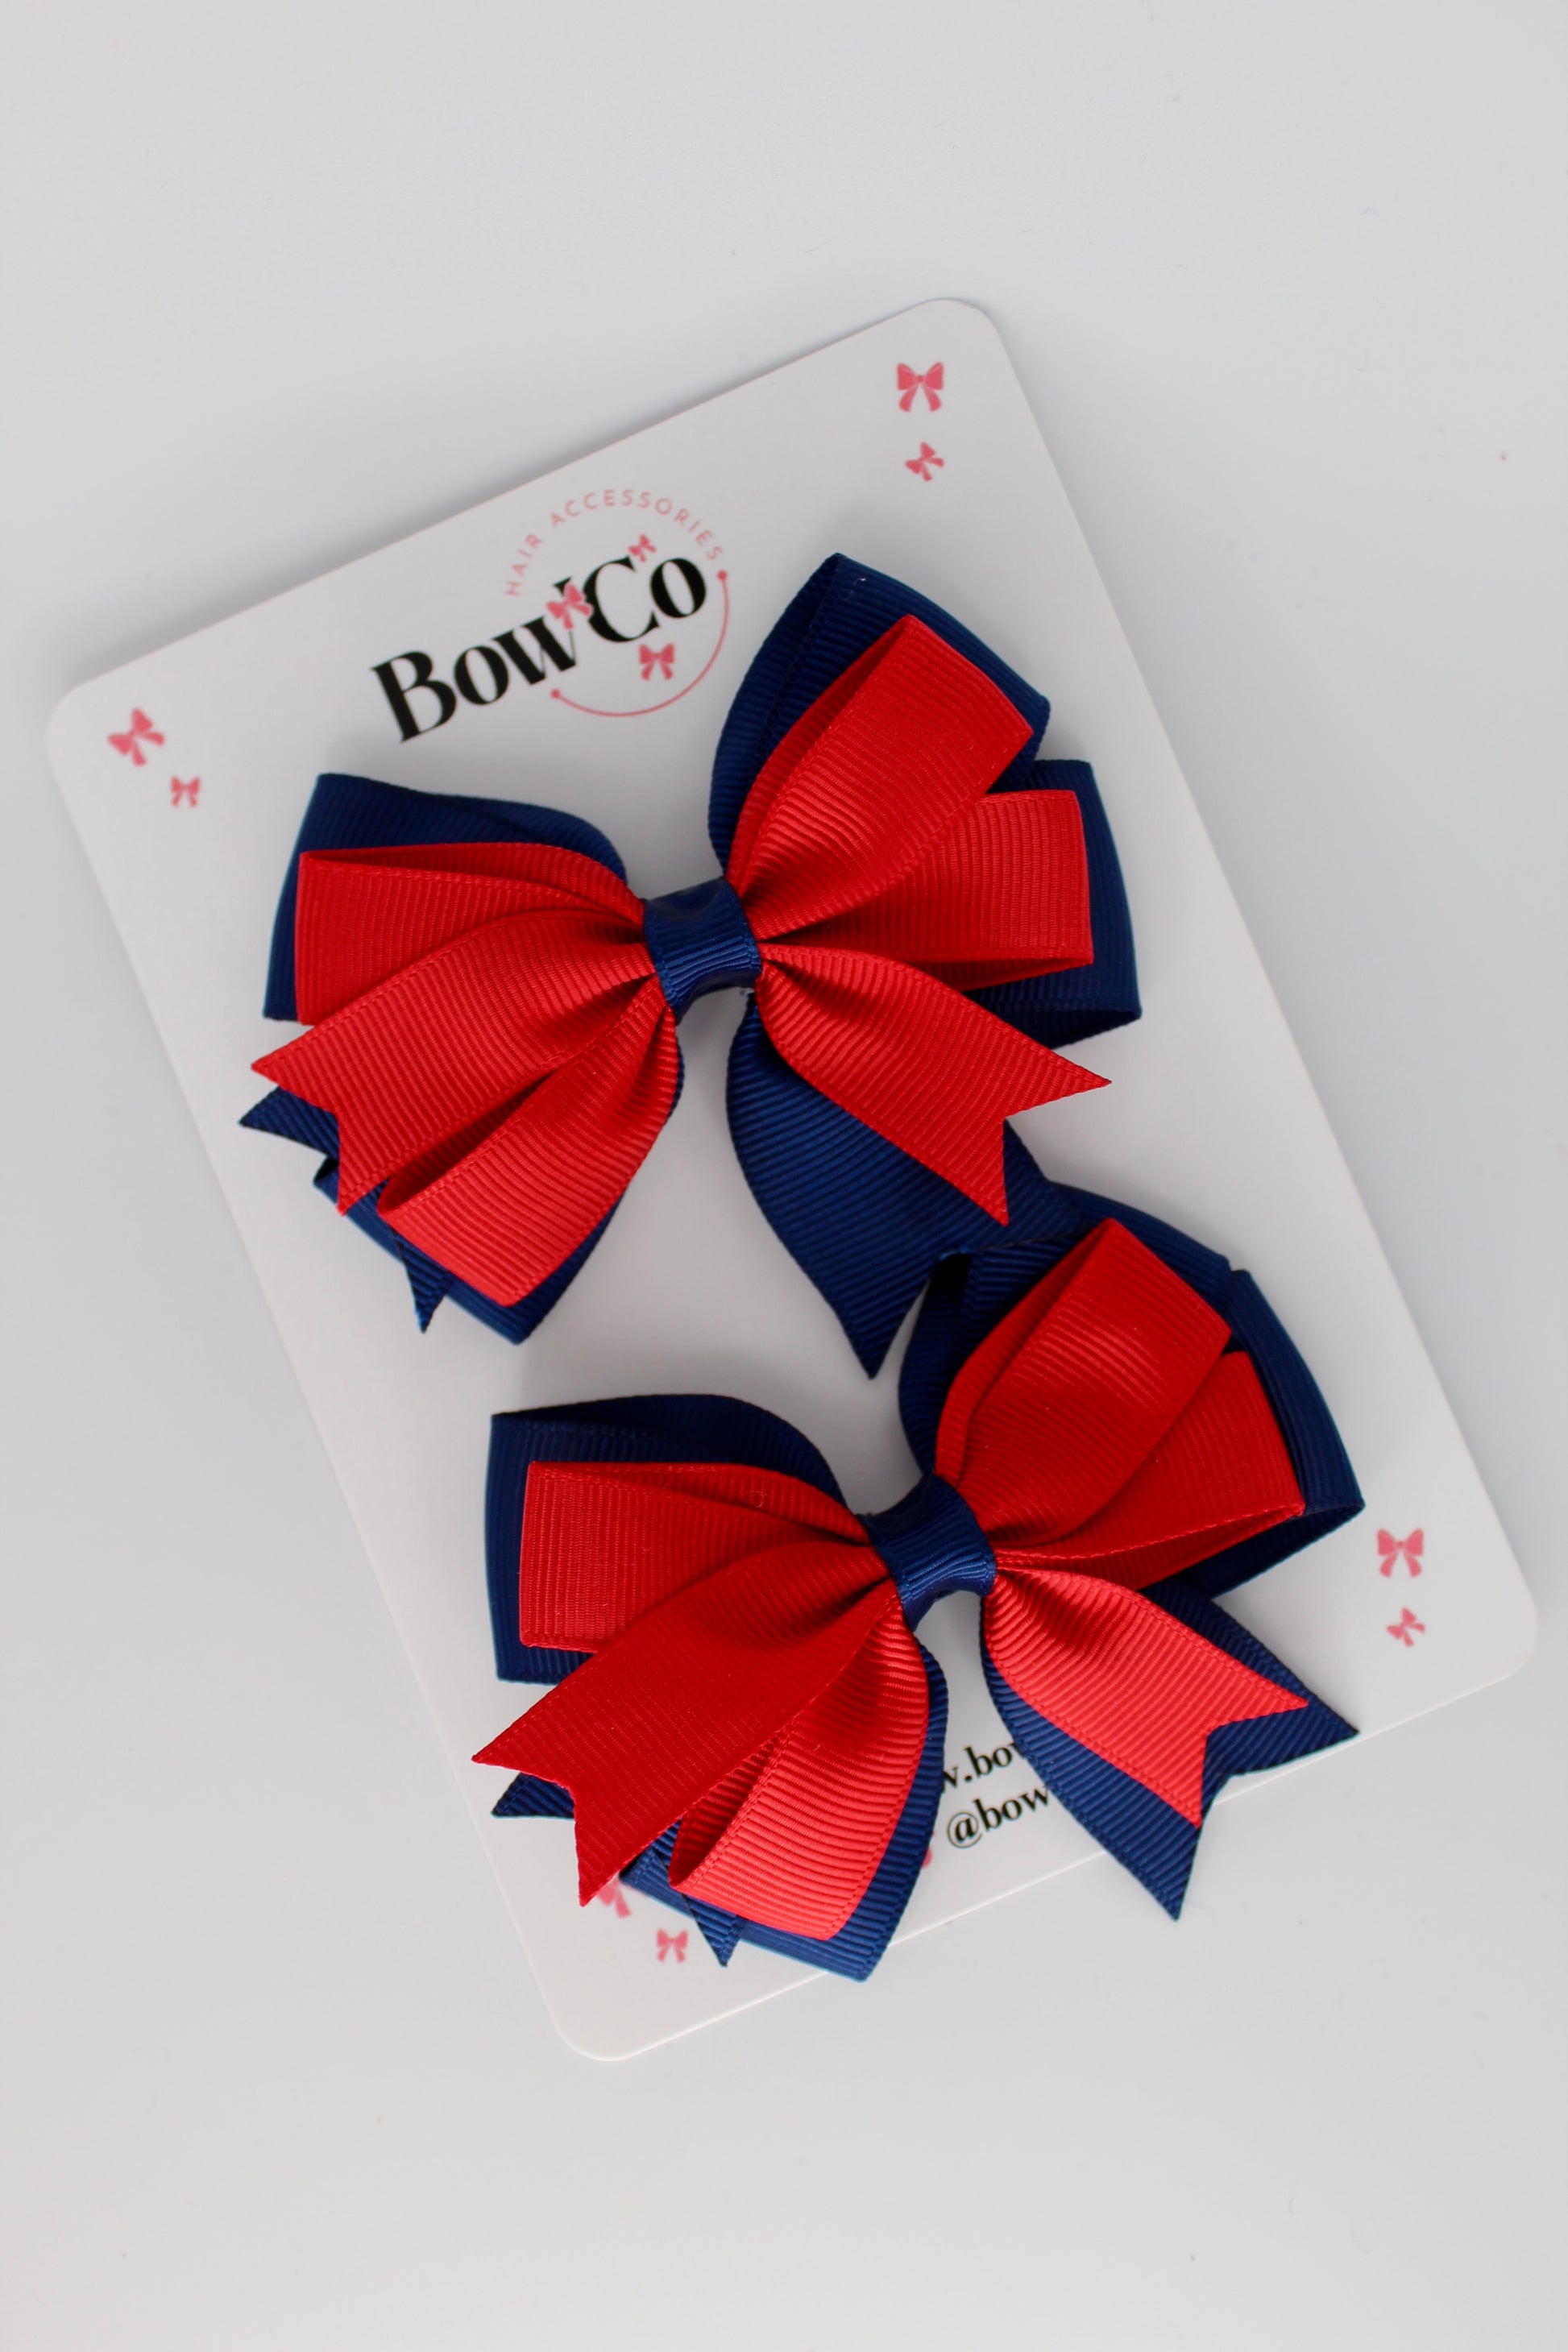 3 Inch Double Tail Bow - Clip - 2 Pack - Red and Navy Blue